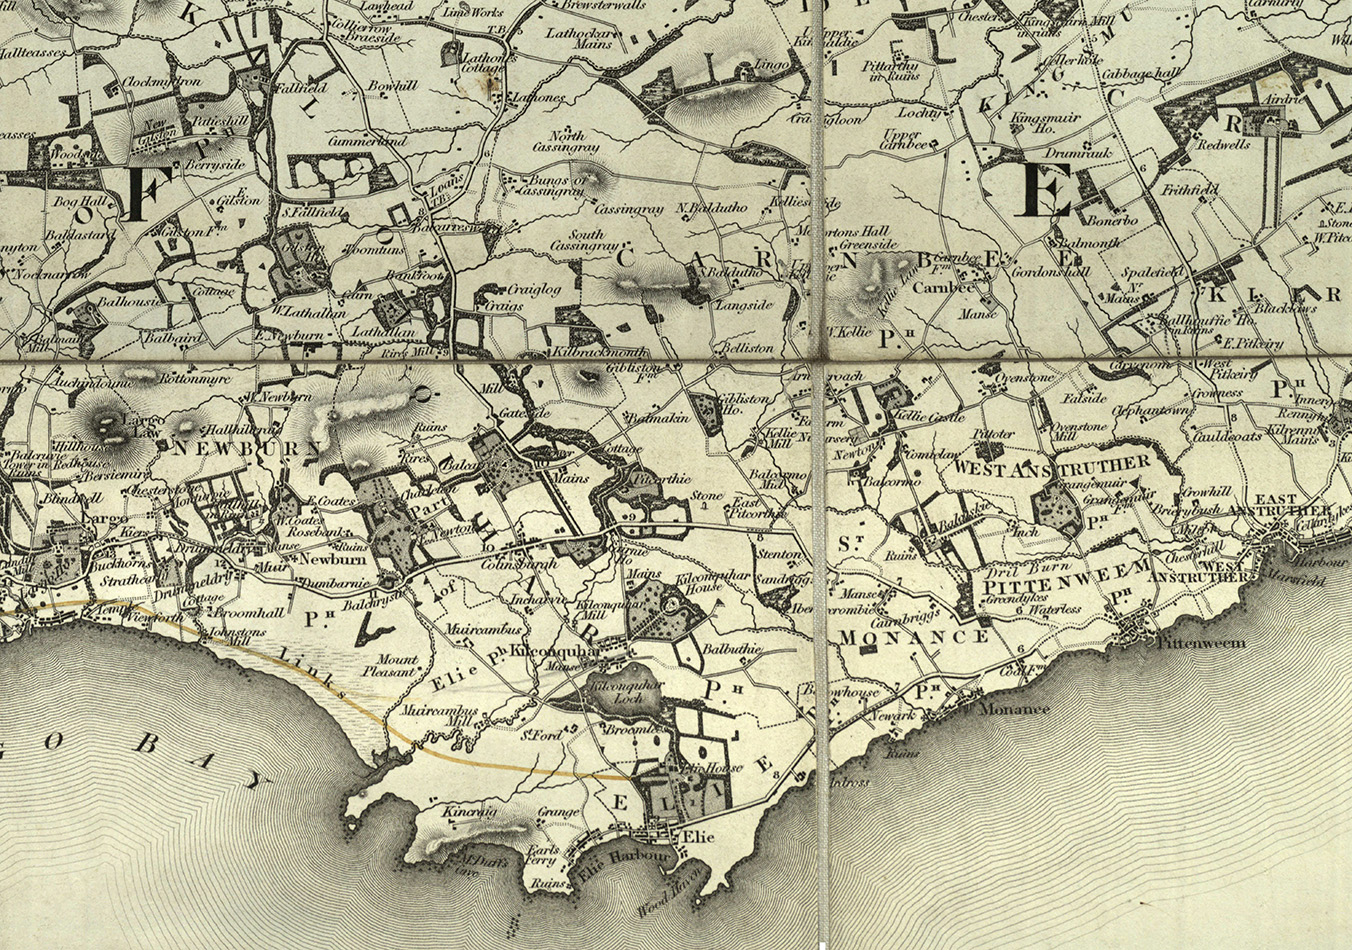 Detail around Kellie Law and estates in the East Neuk, from Counties of Fife and Kinross by Thomas Sharp, Christopher Greenwood and William Fowler of London, showing parishes and houses of Nobility, Gentry and Clergy, 1826, (msdep121/8/2/3/8/3).